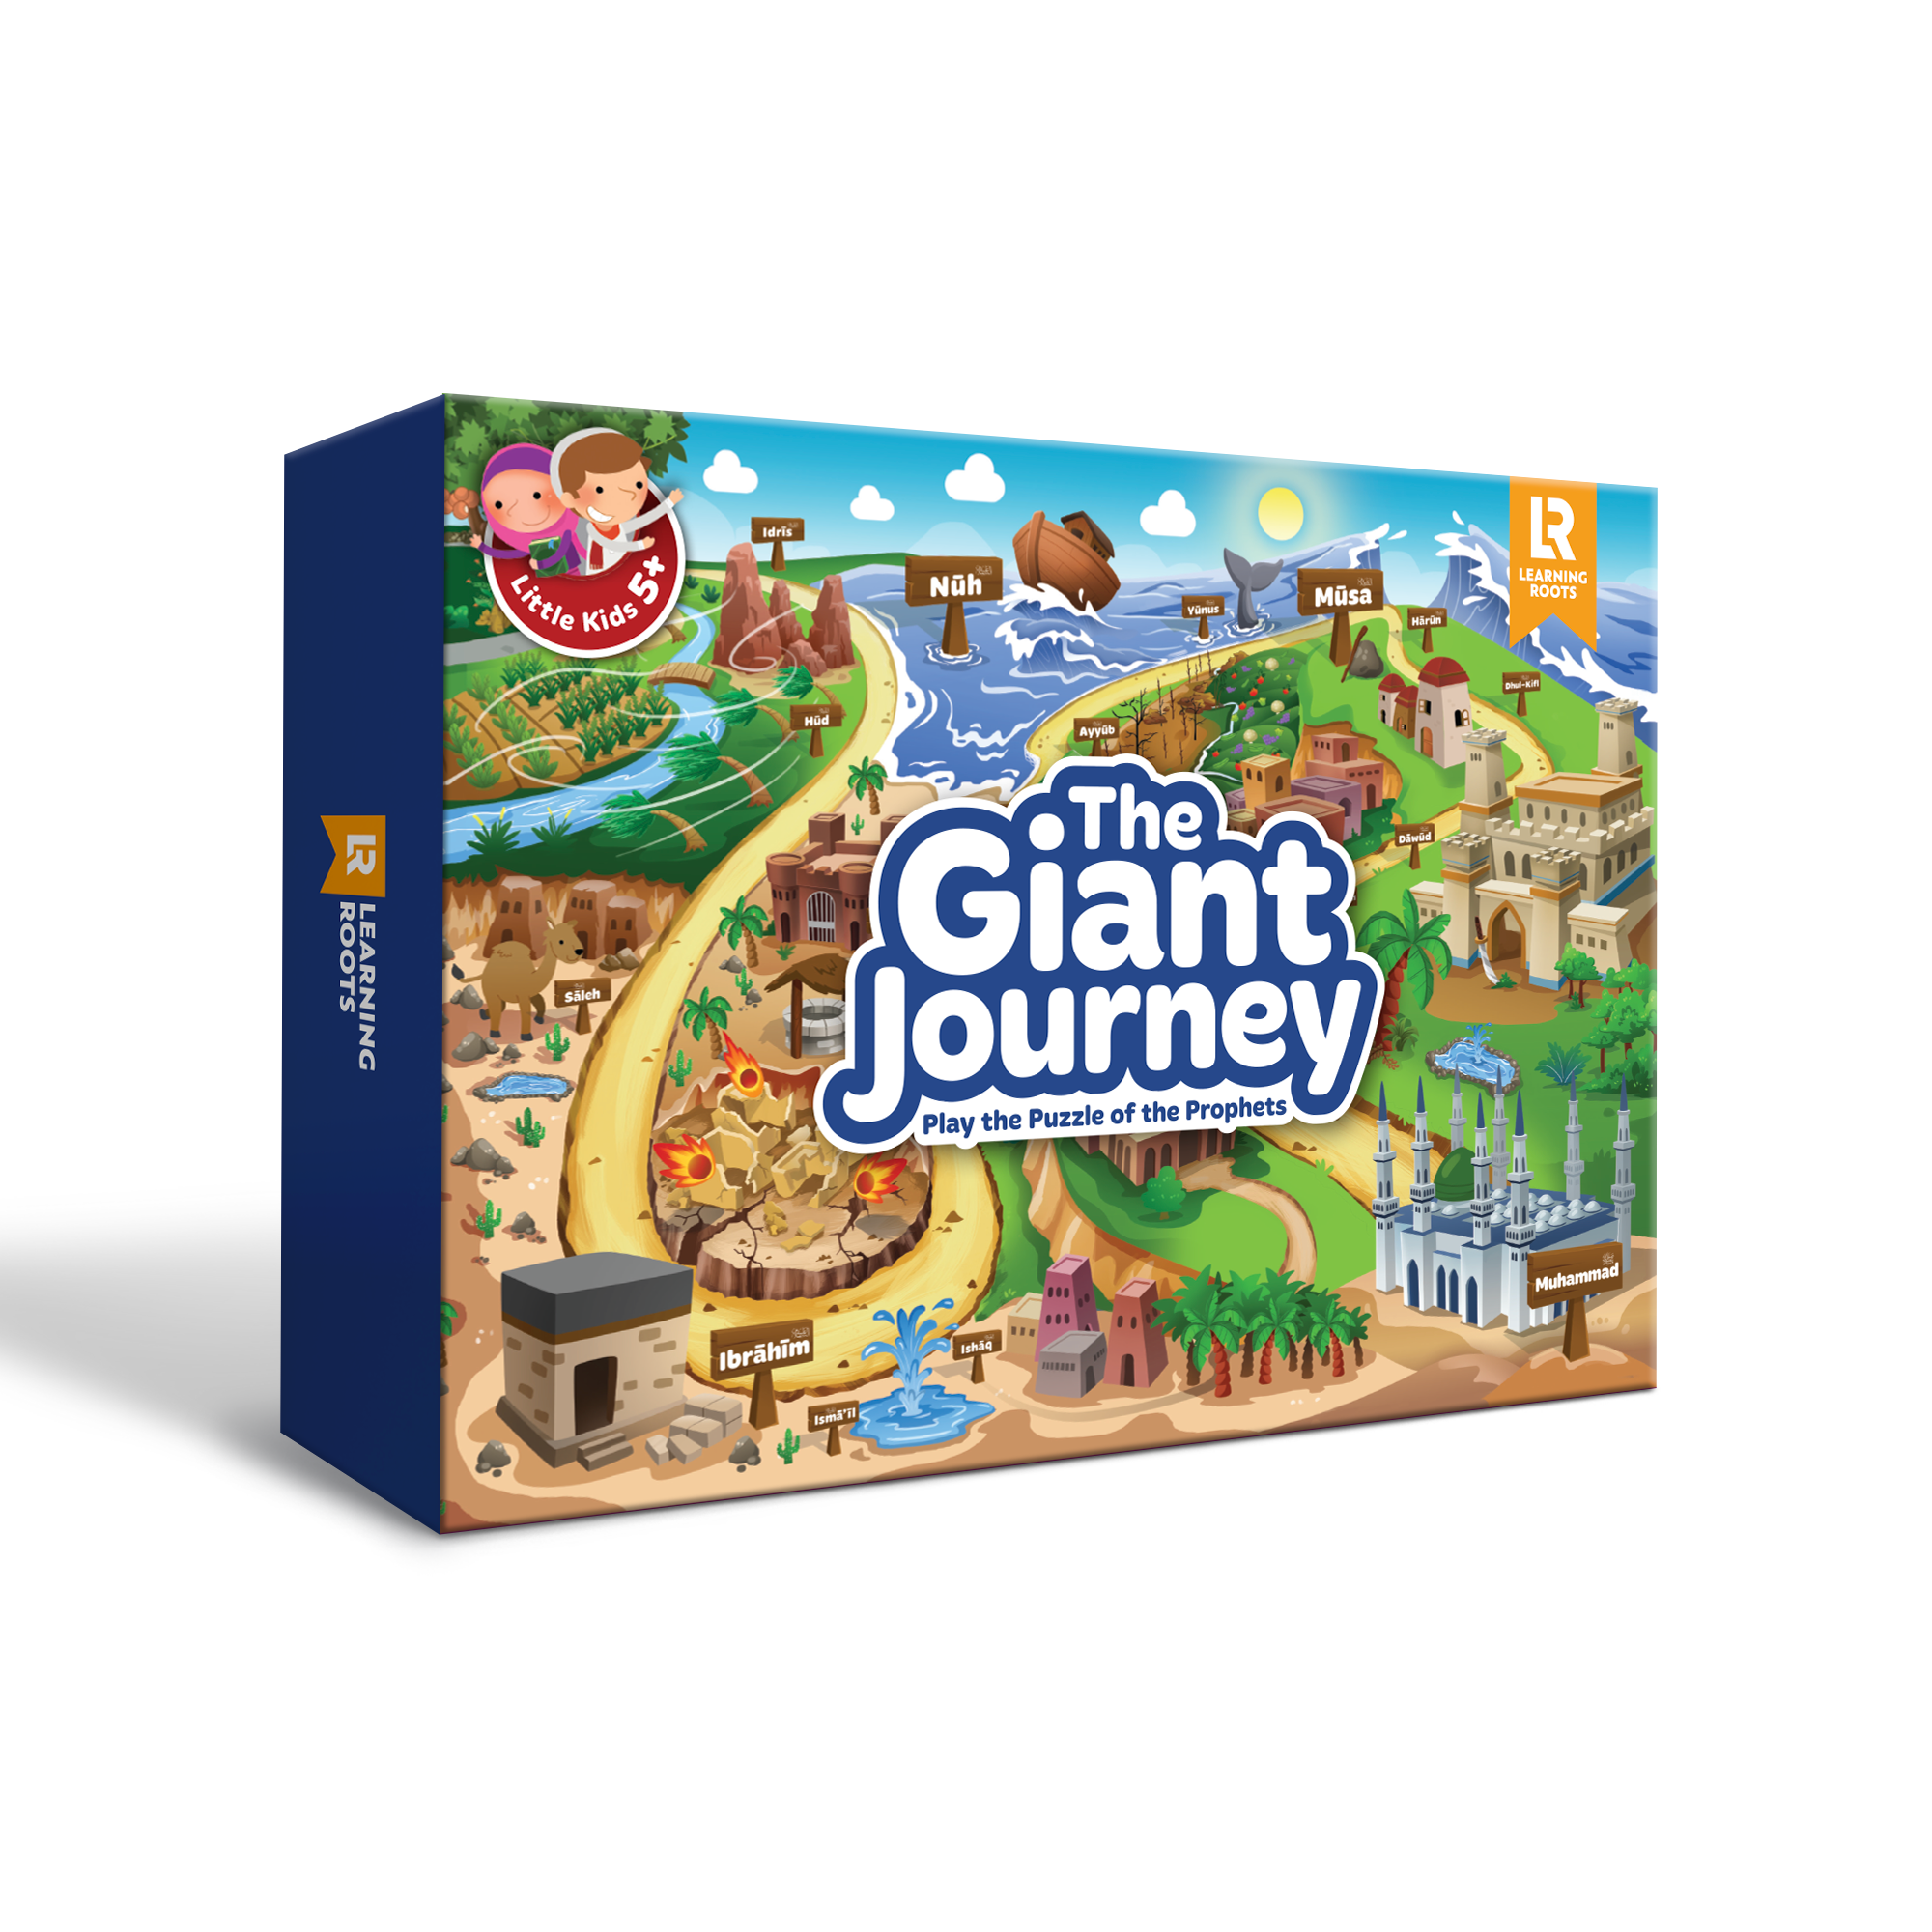 The Giant Journey